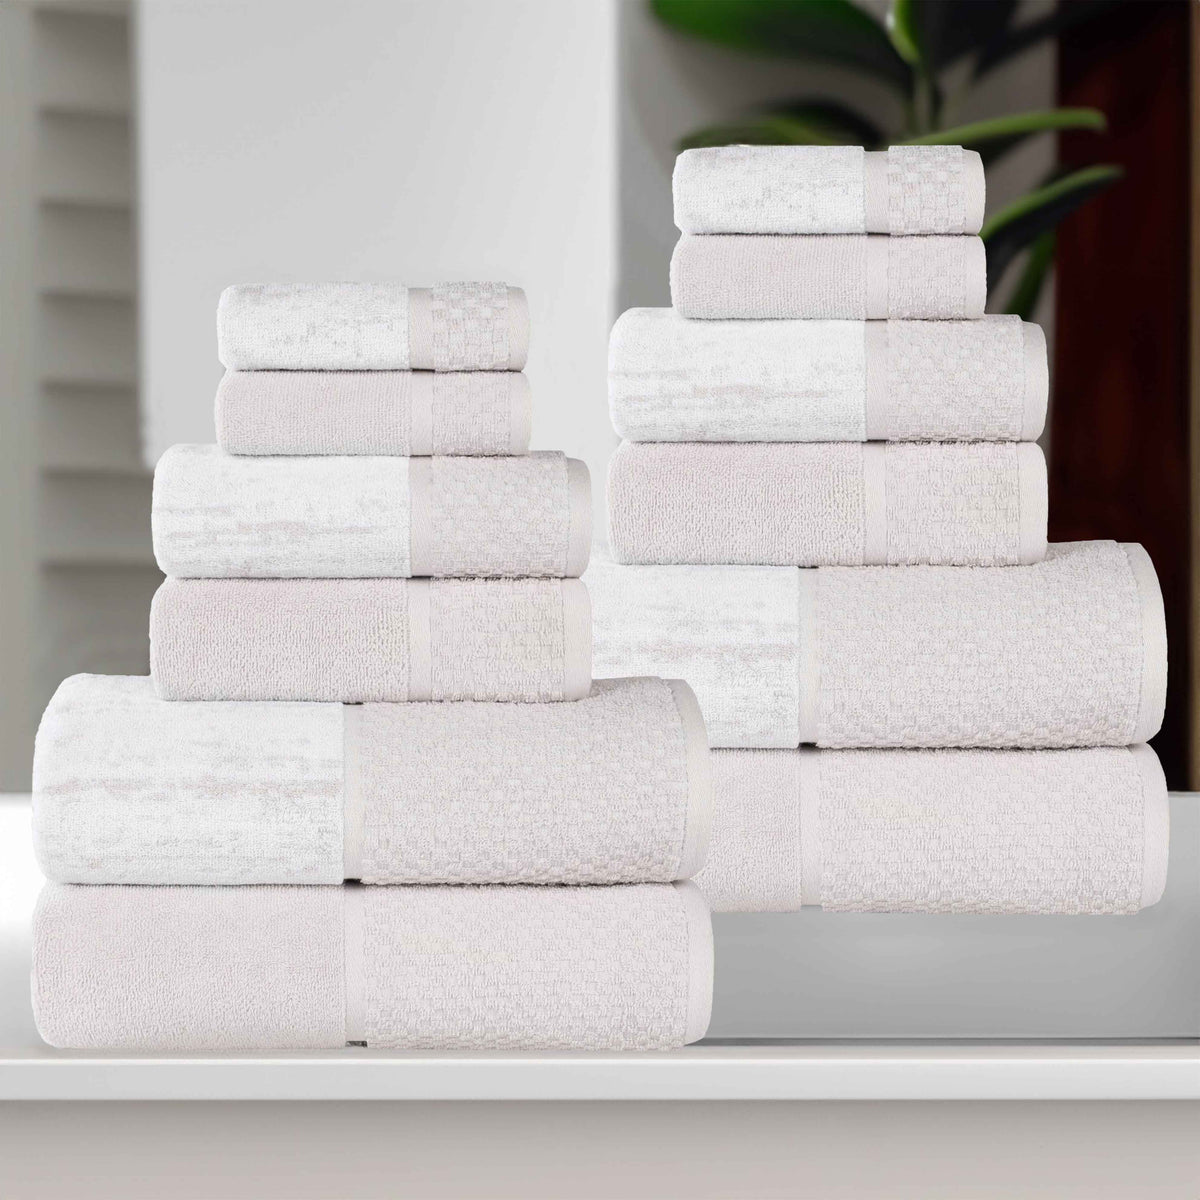 Lodie Cotton Jacquard Solid and Two-Toned 12 Piece Assorted Towel Set - Stone-White